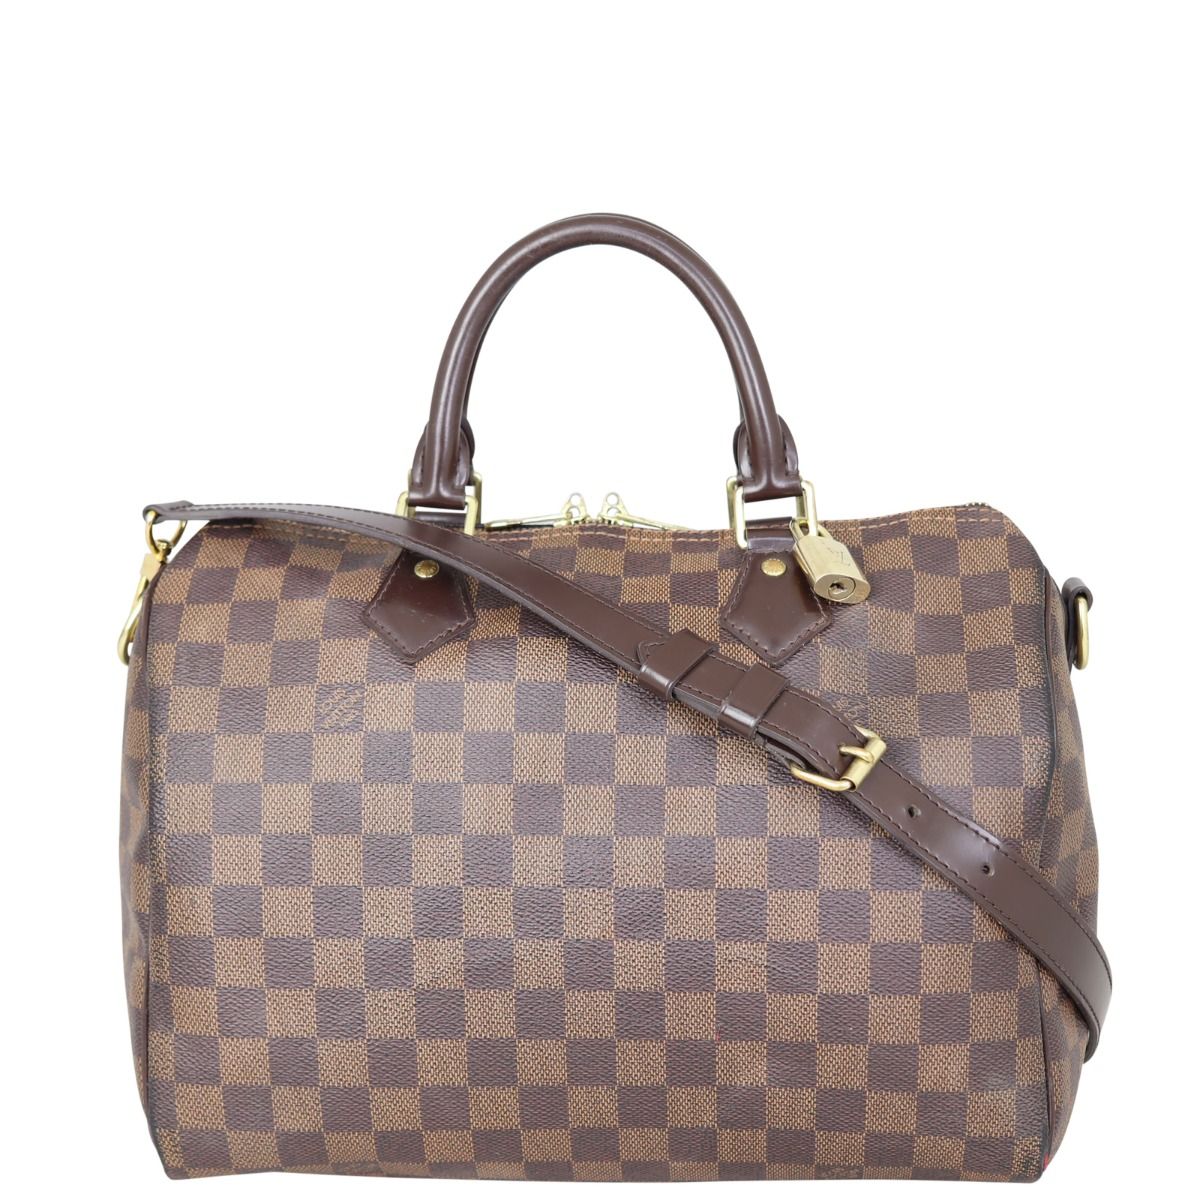 Away From Blue  Aussie Mum Style, Away From The Blue Jeans Rut: Dresses, Louis  Vuitton Speedy Bandouliere Bag in Damier Ebene